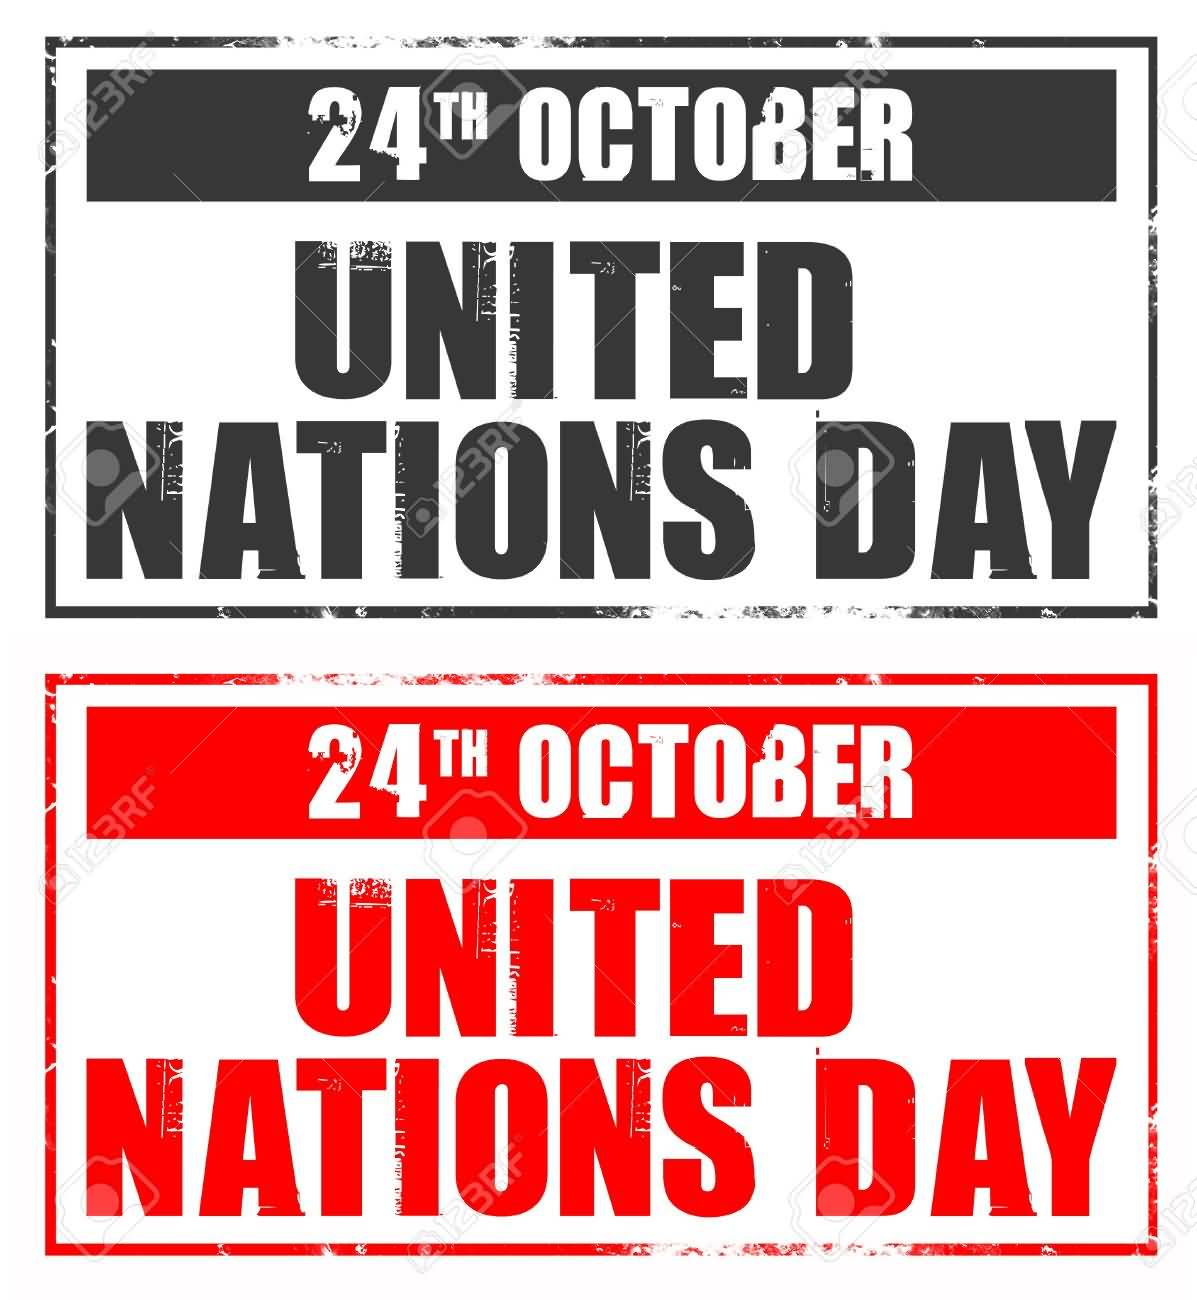 24th October United Nations Day Greetings